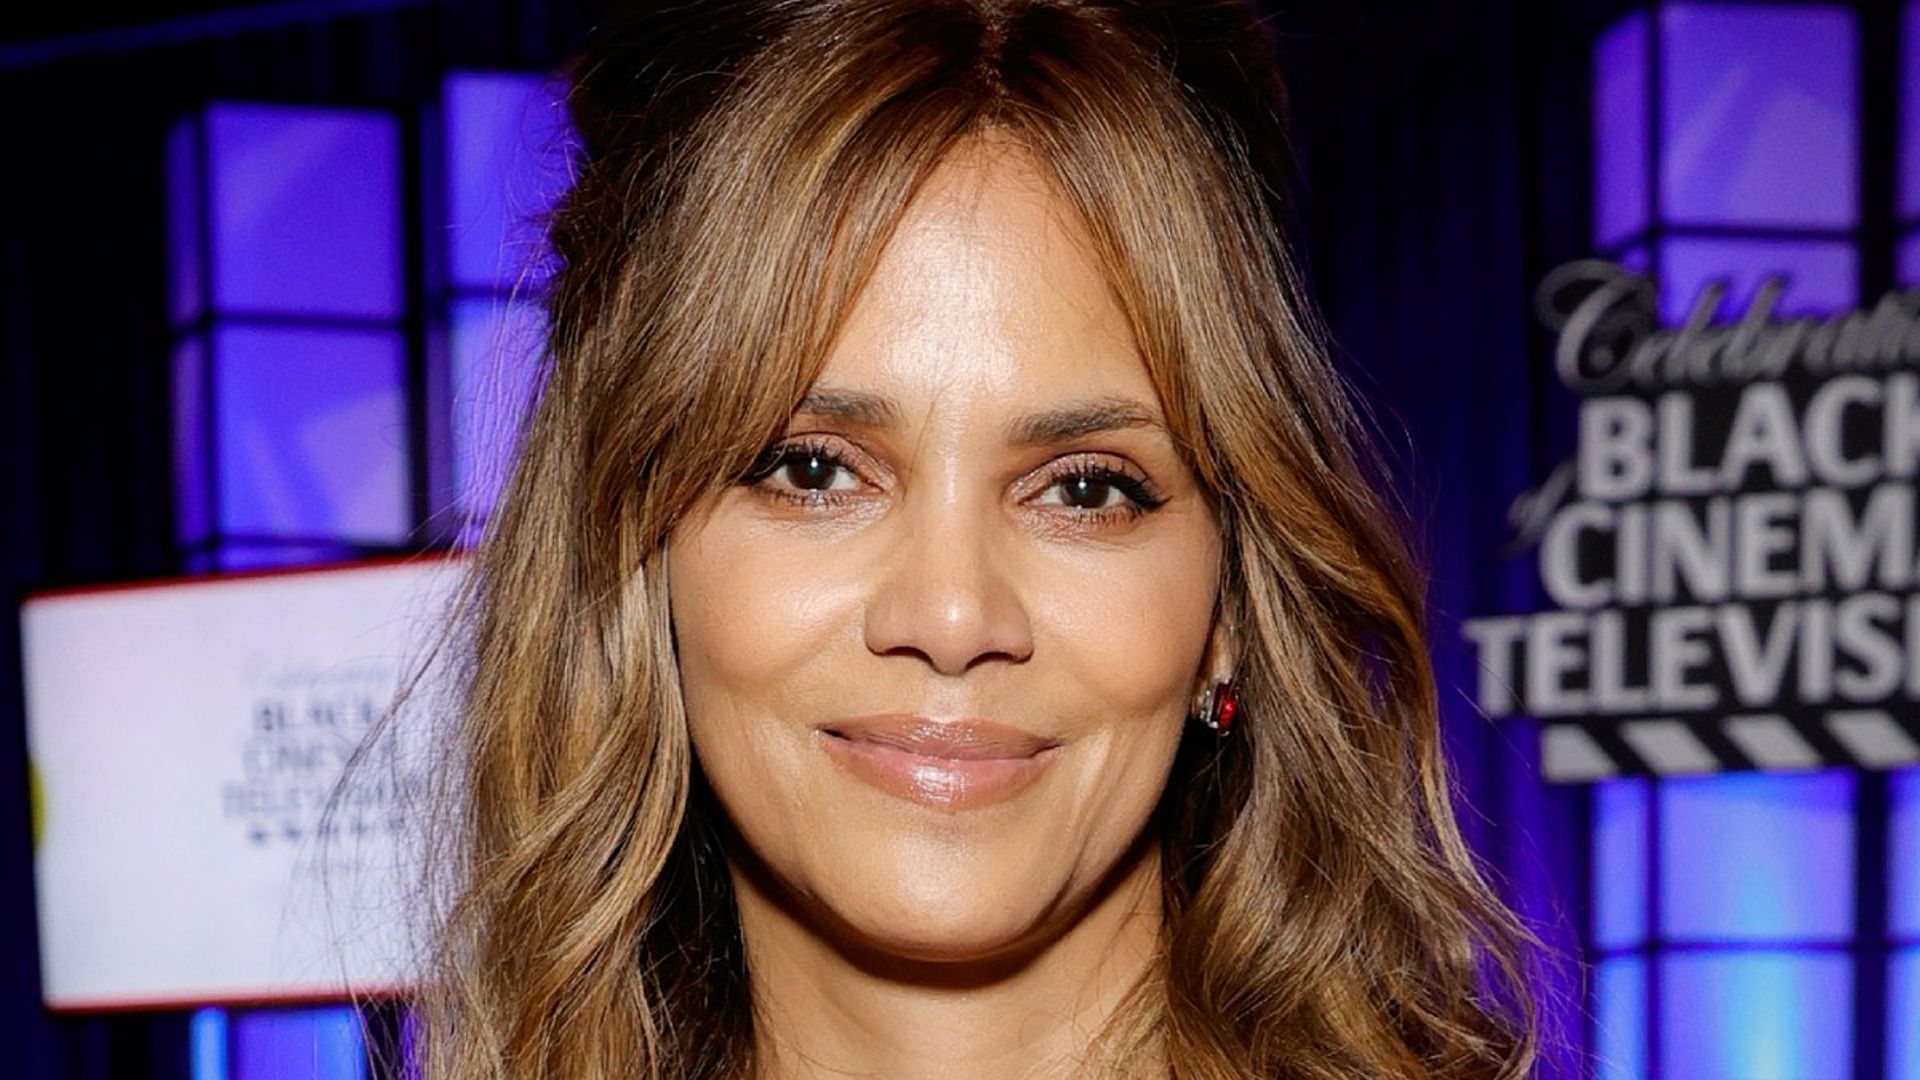 Halle Berry thanks 'love of my life' as she accepts Critics Choice award